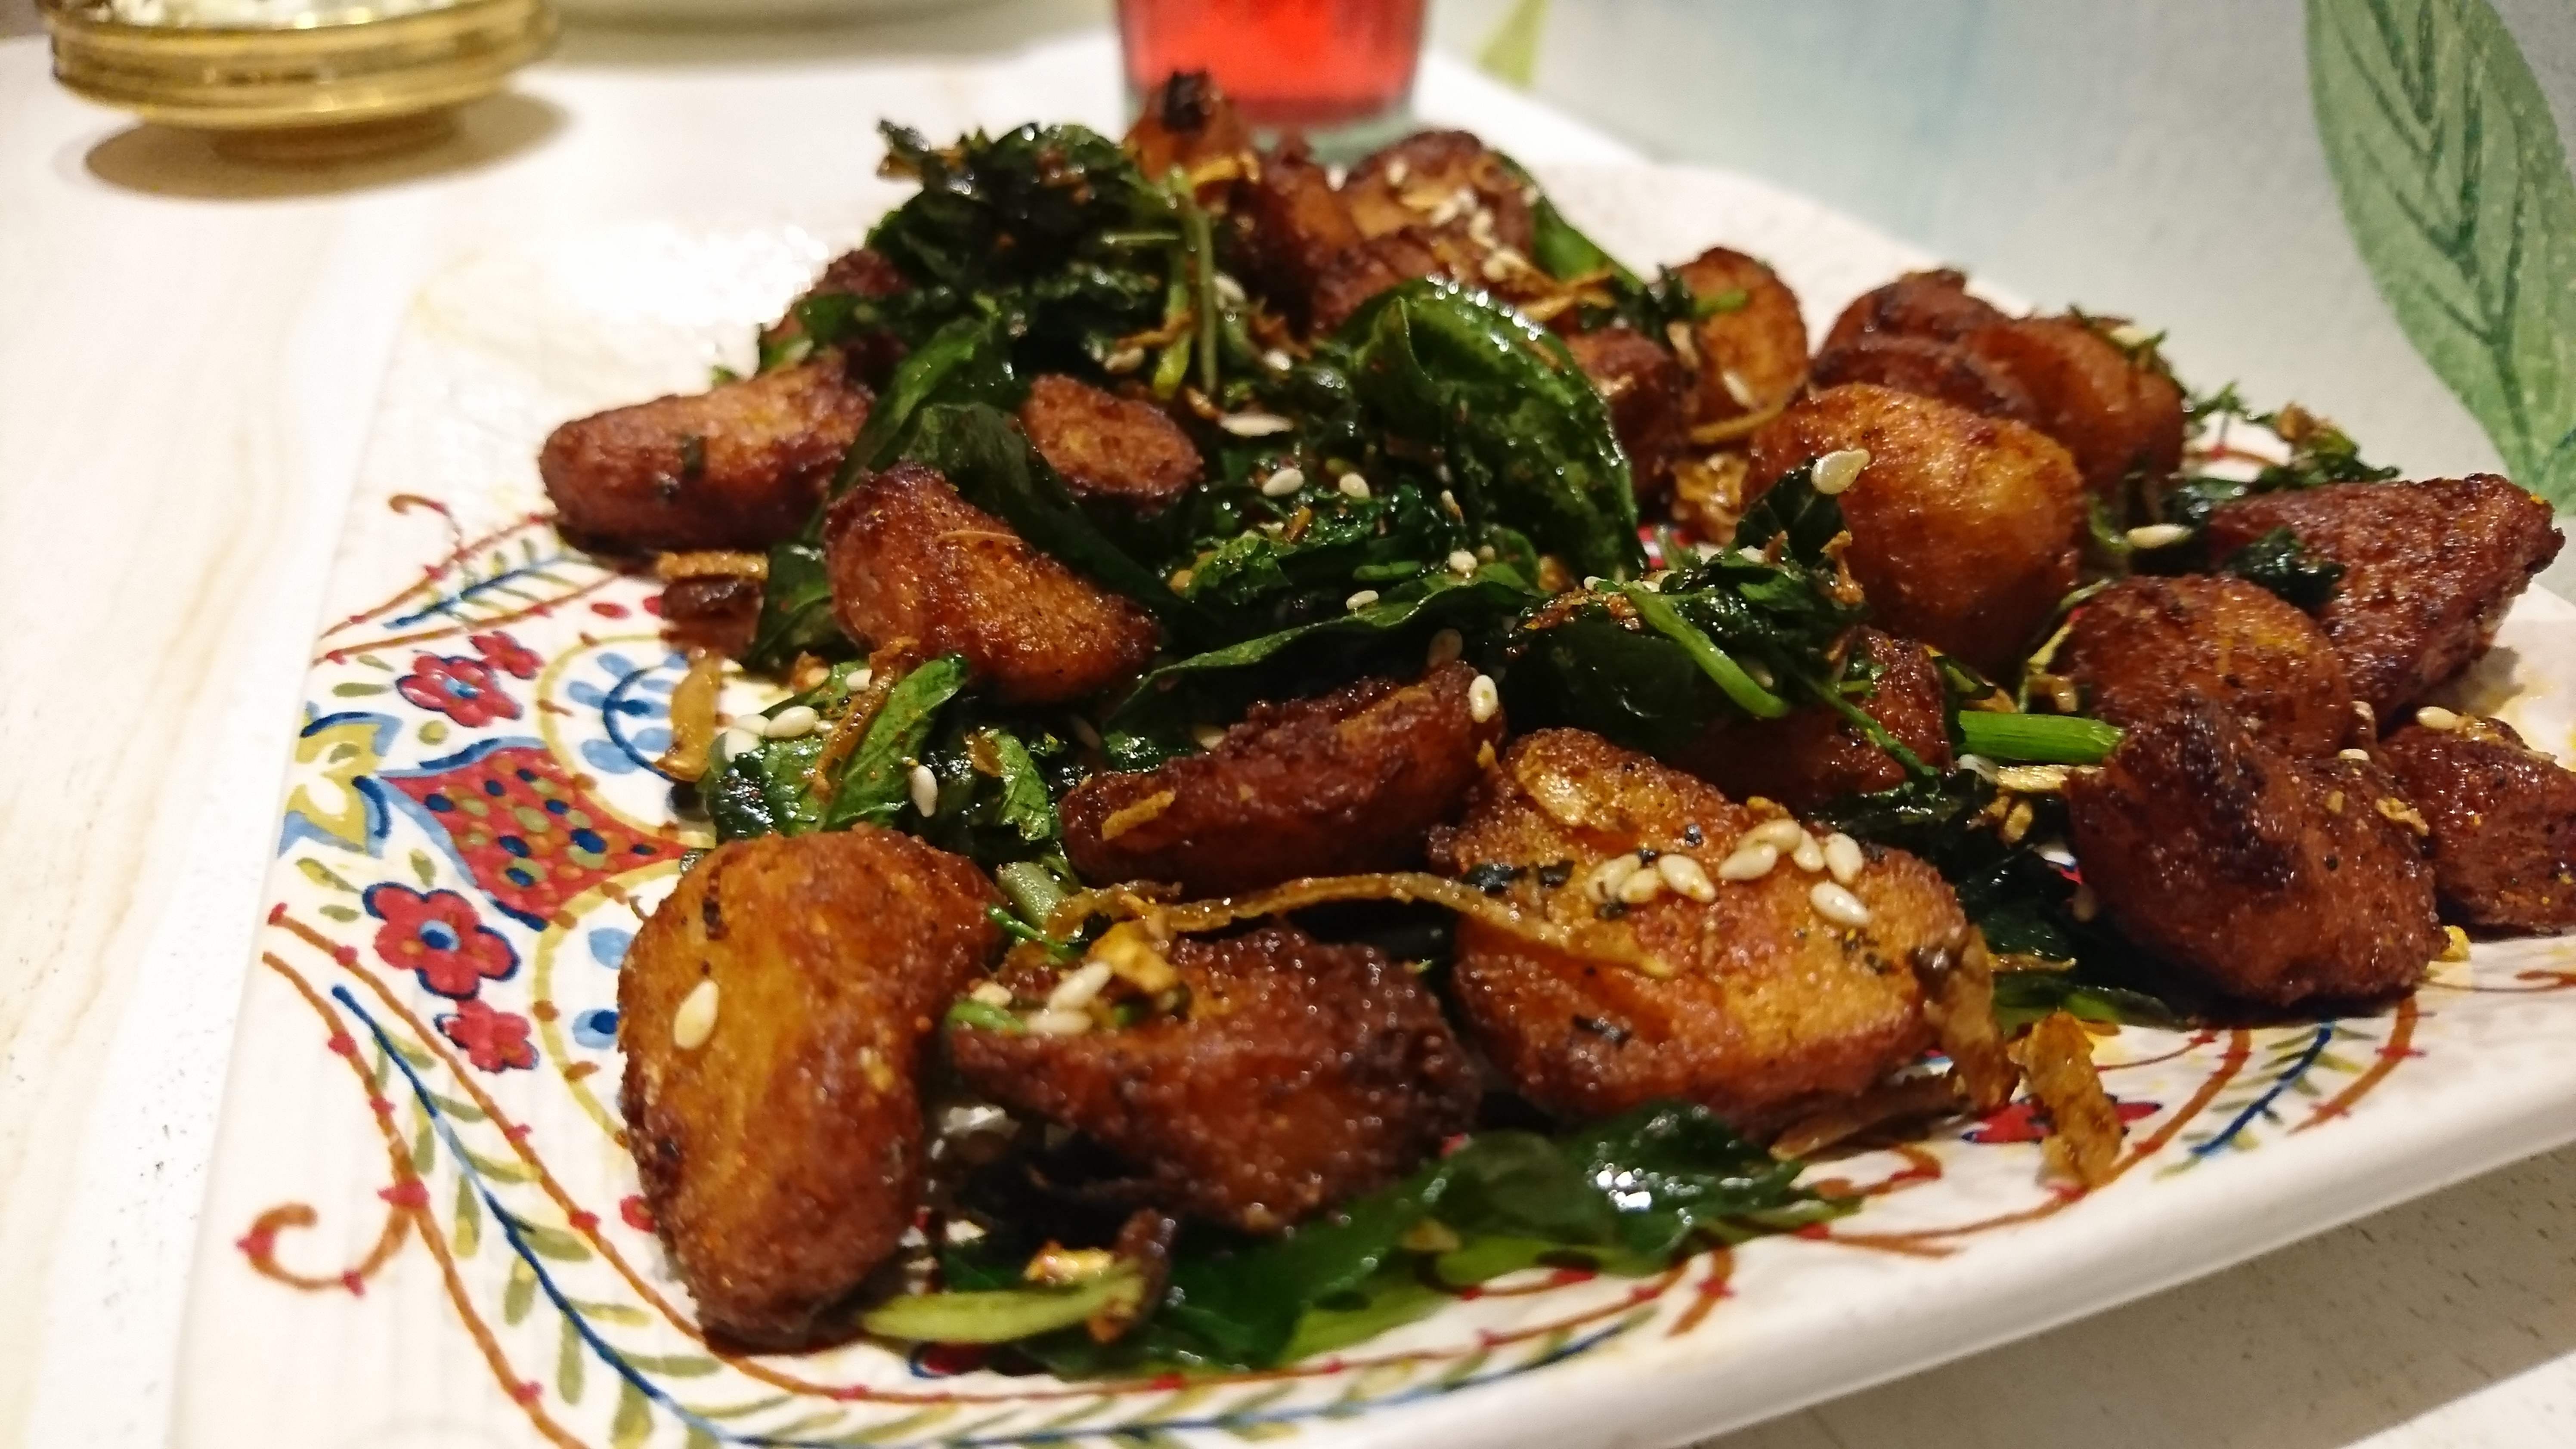 Dish,Cuisine,Food,Ingredient,Meat,Fried food,Produce,Recipe,General tso's chicken,Side dish